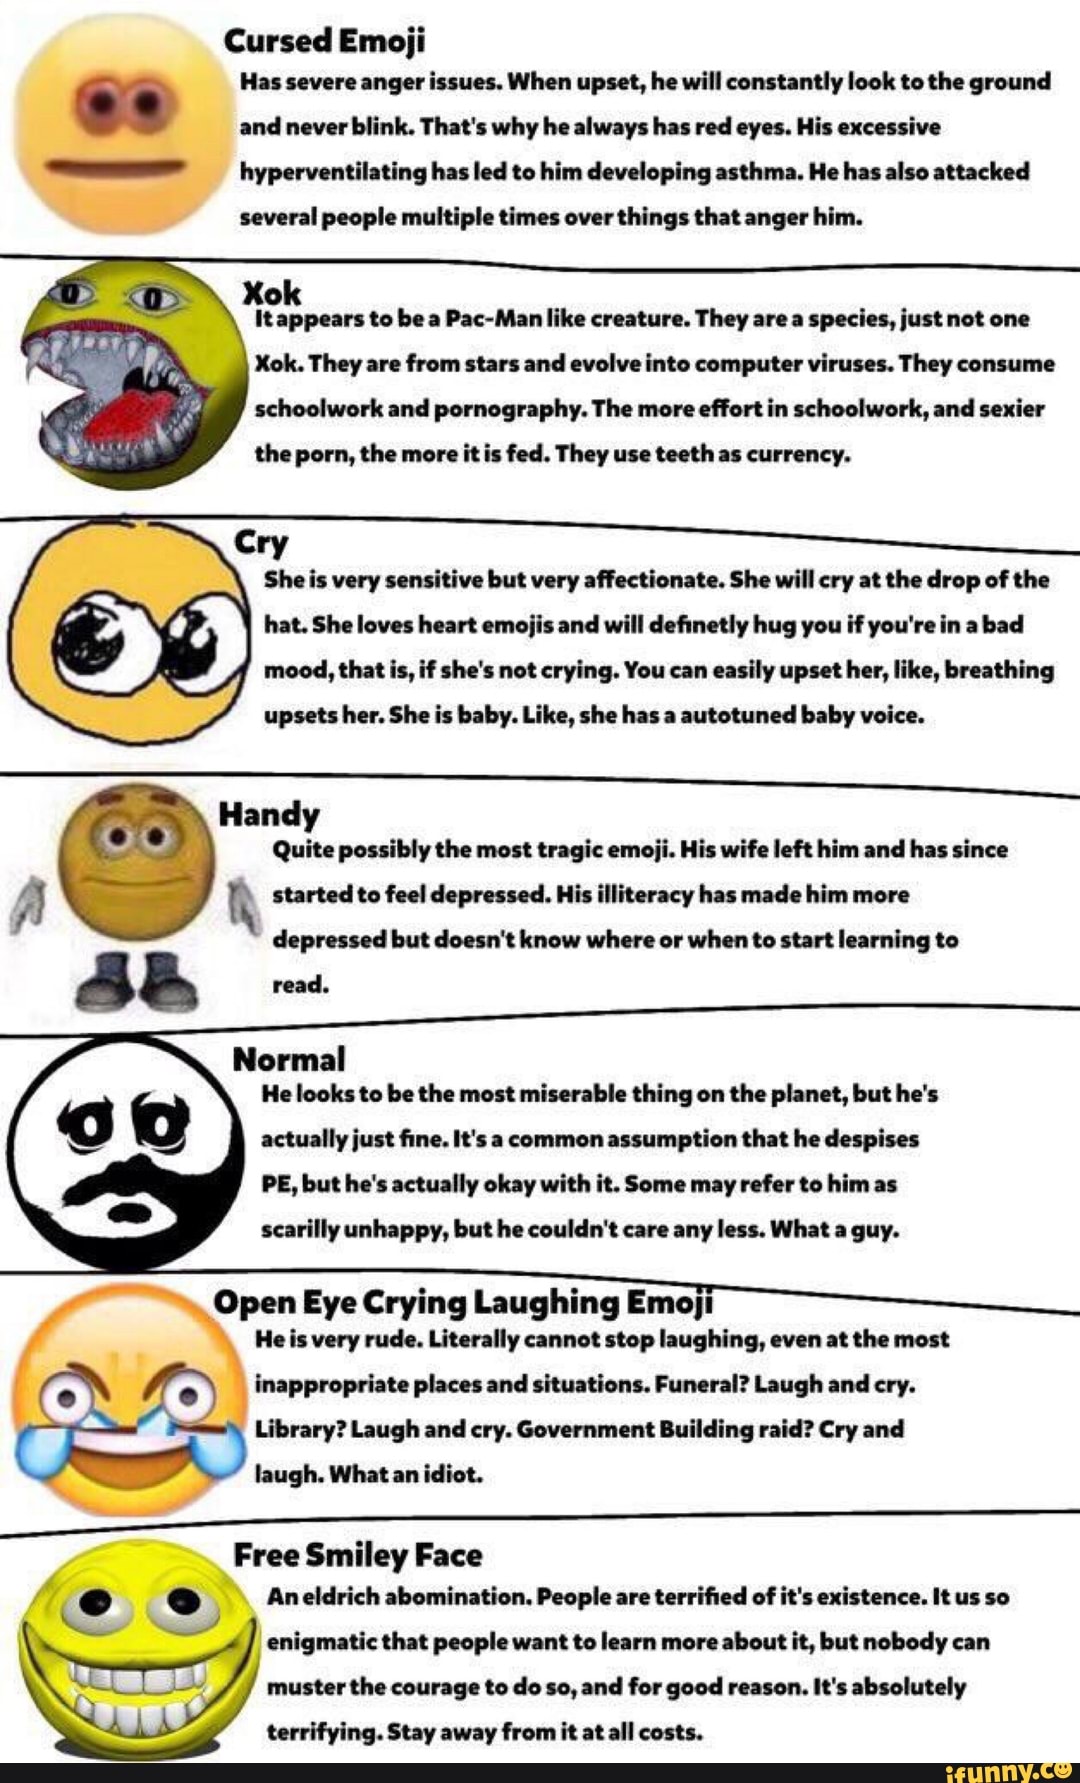 Why Using Cursed Emojis (Might) Get You Laid 